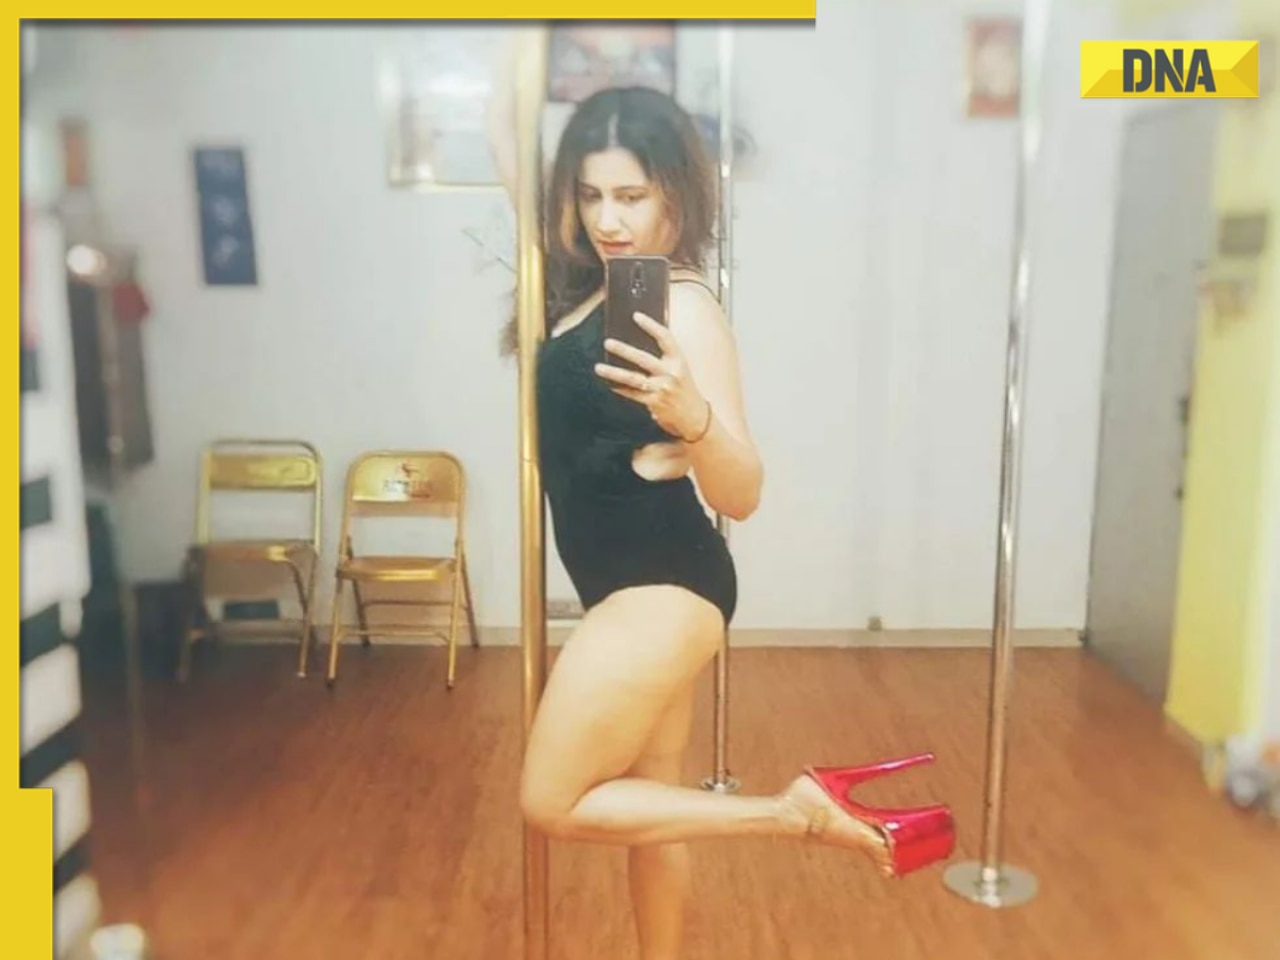   Meet actress, Alia Bhatt's cousin, became overnight star; divorce and depression ruined her career, is now a pole dancer 